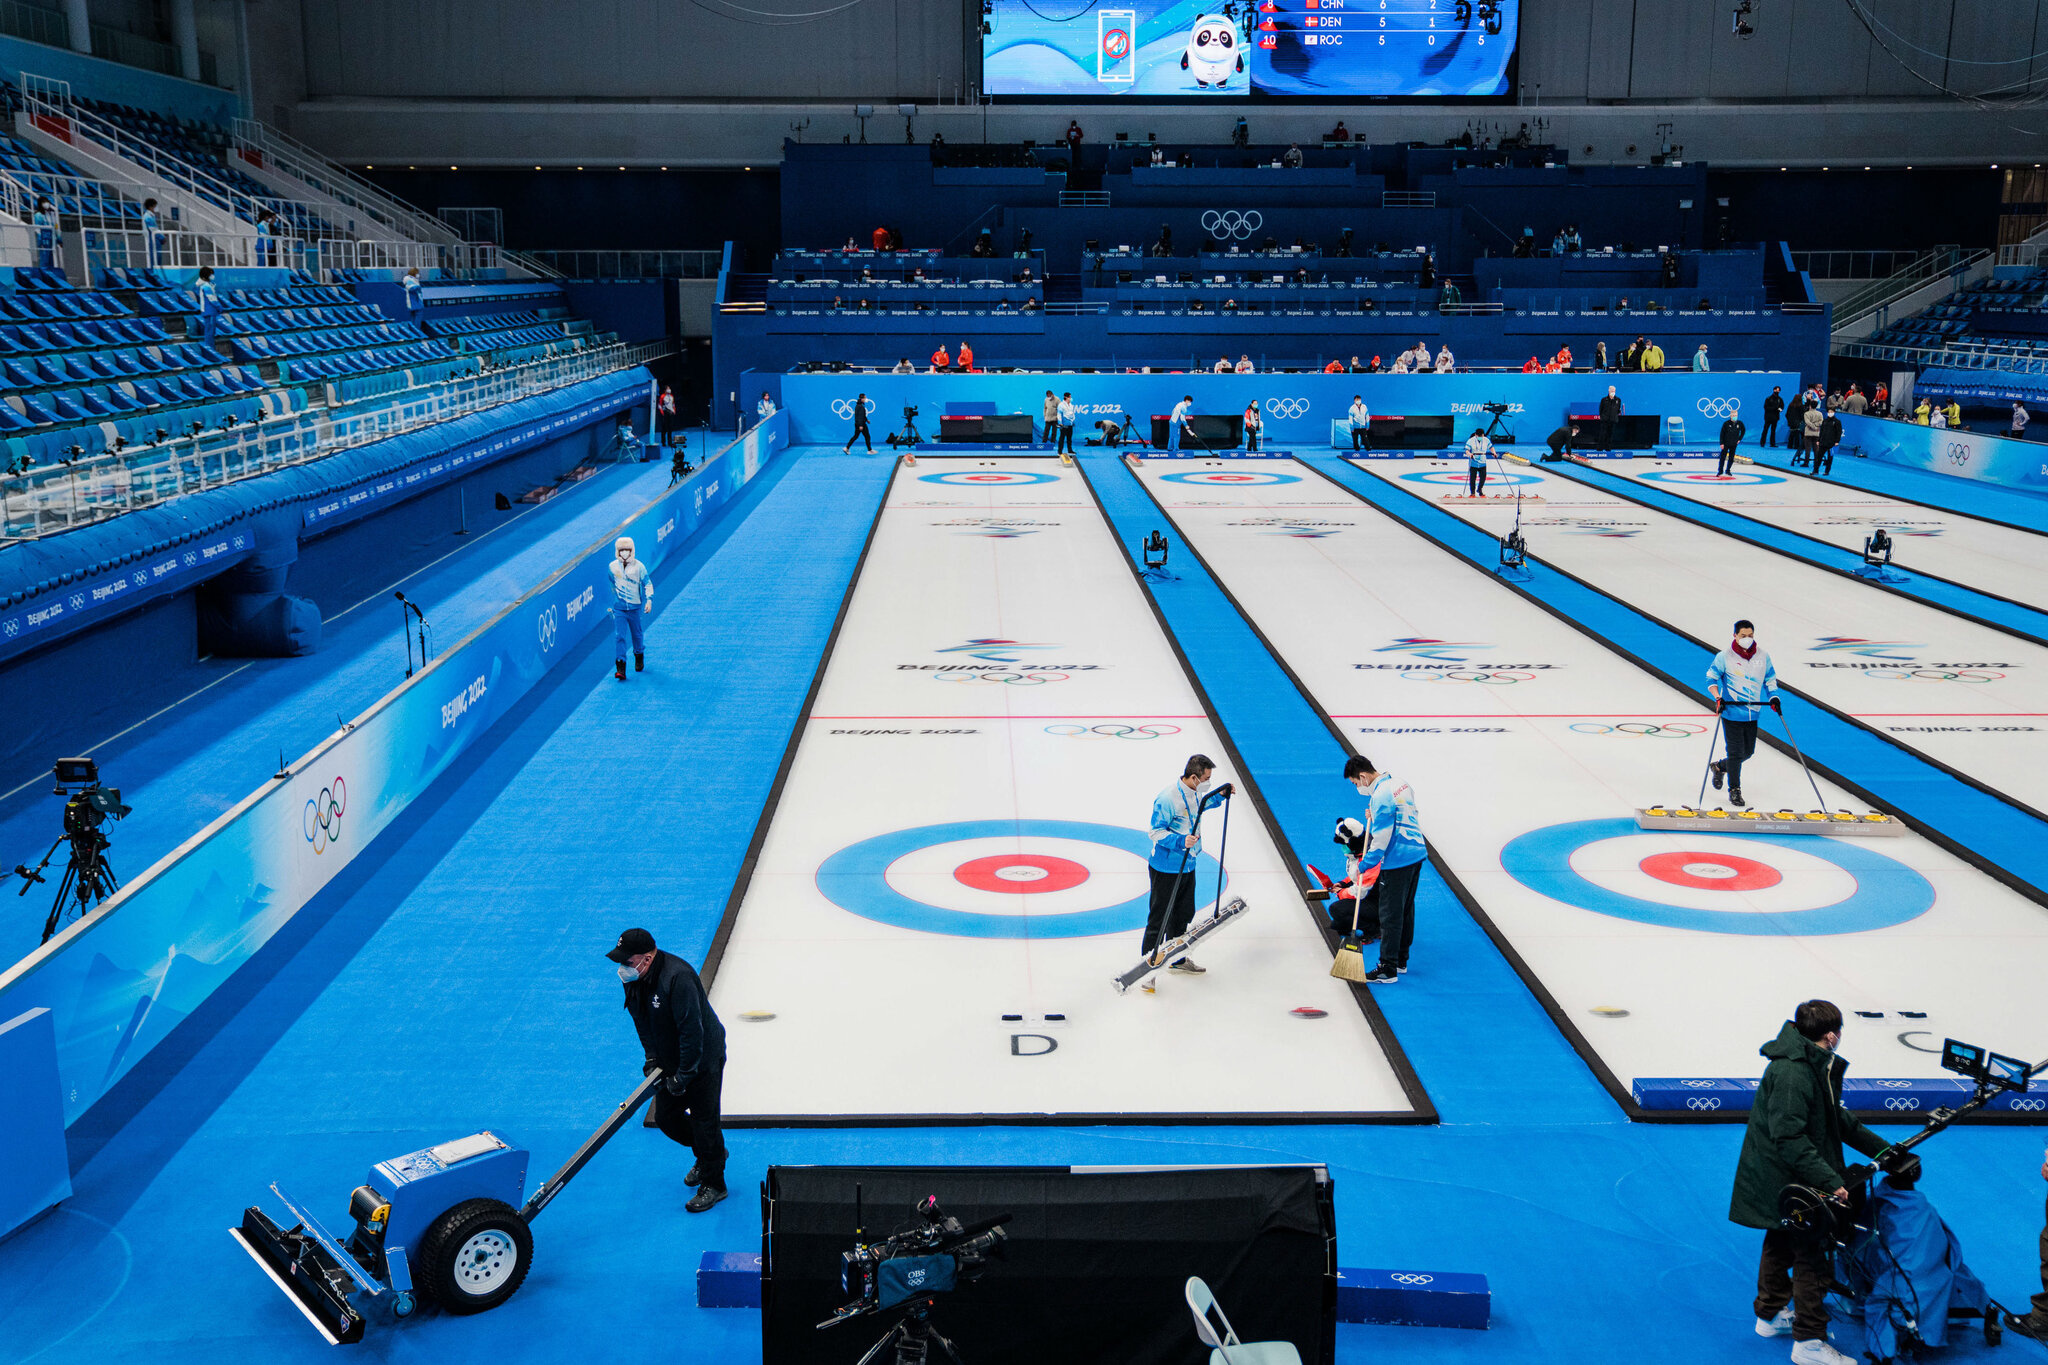 Curling: The last preparations for the ice rink at the 2022 Beijing Winter Olympics. 2050x1370 HD Wallpaper.